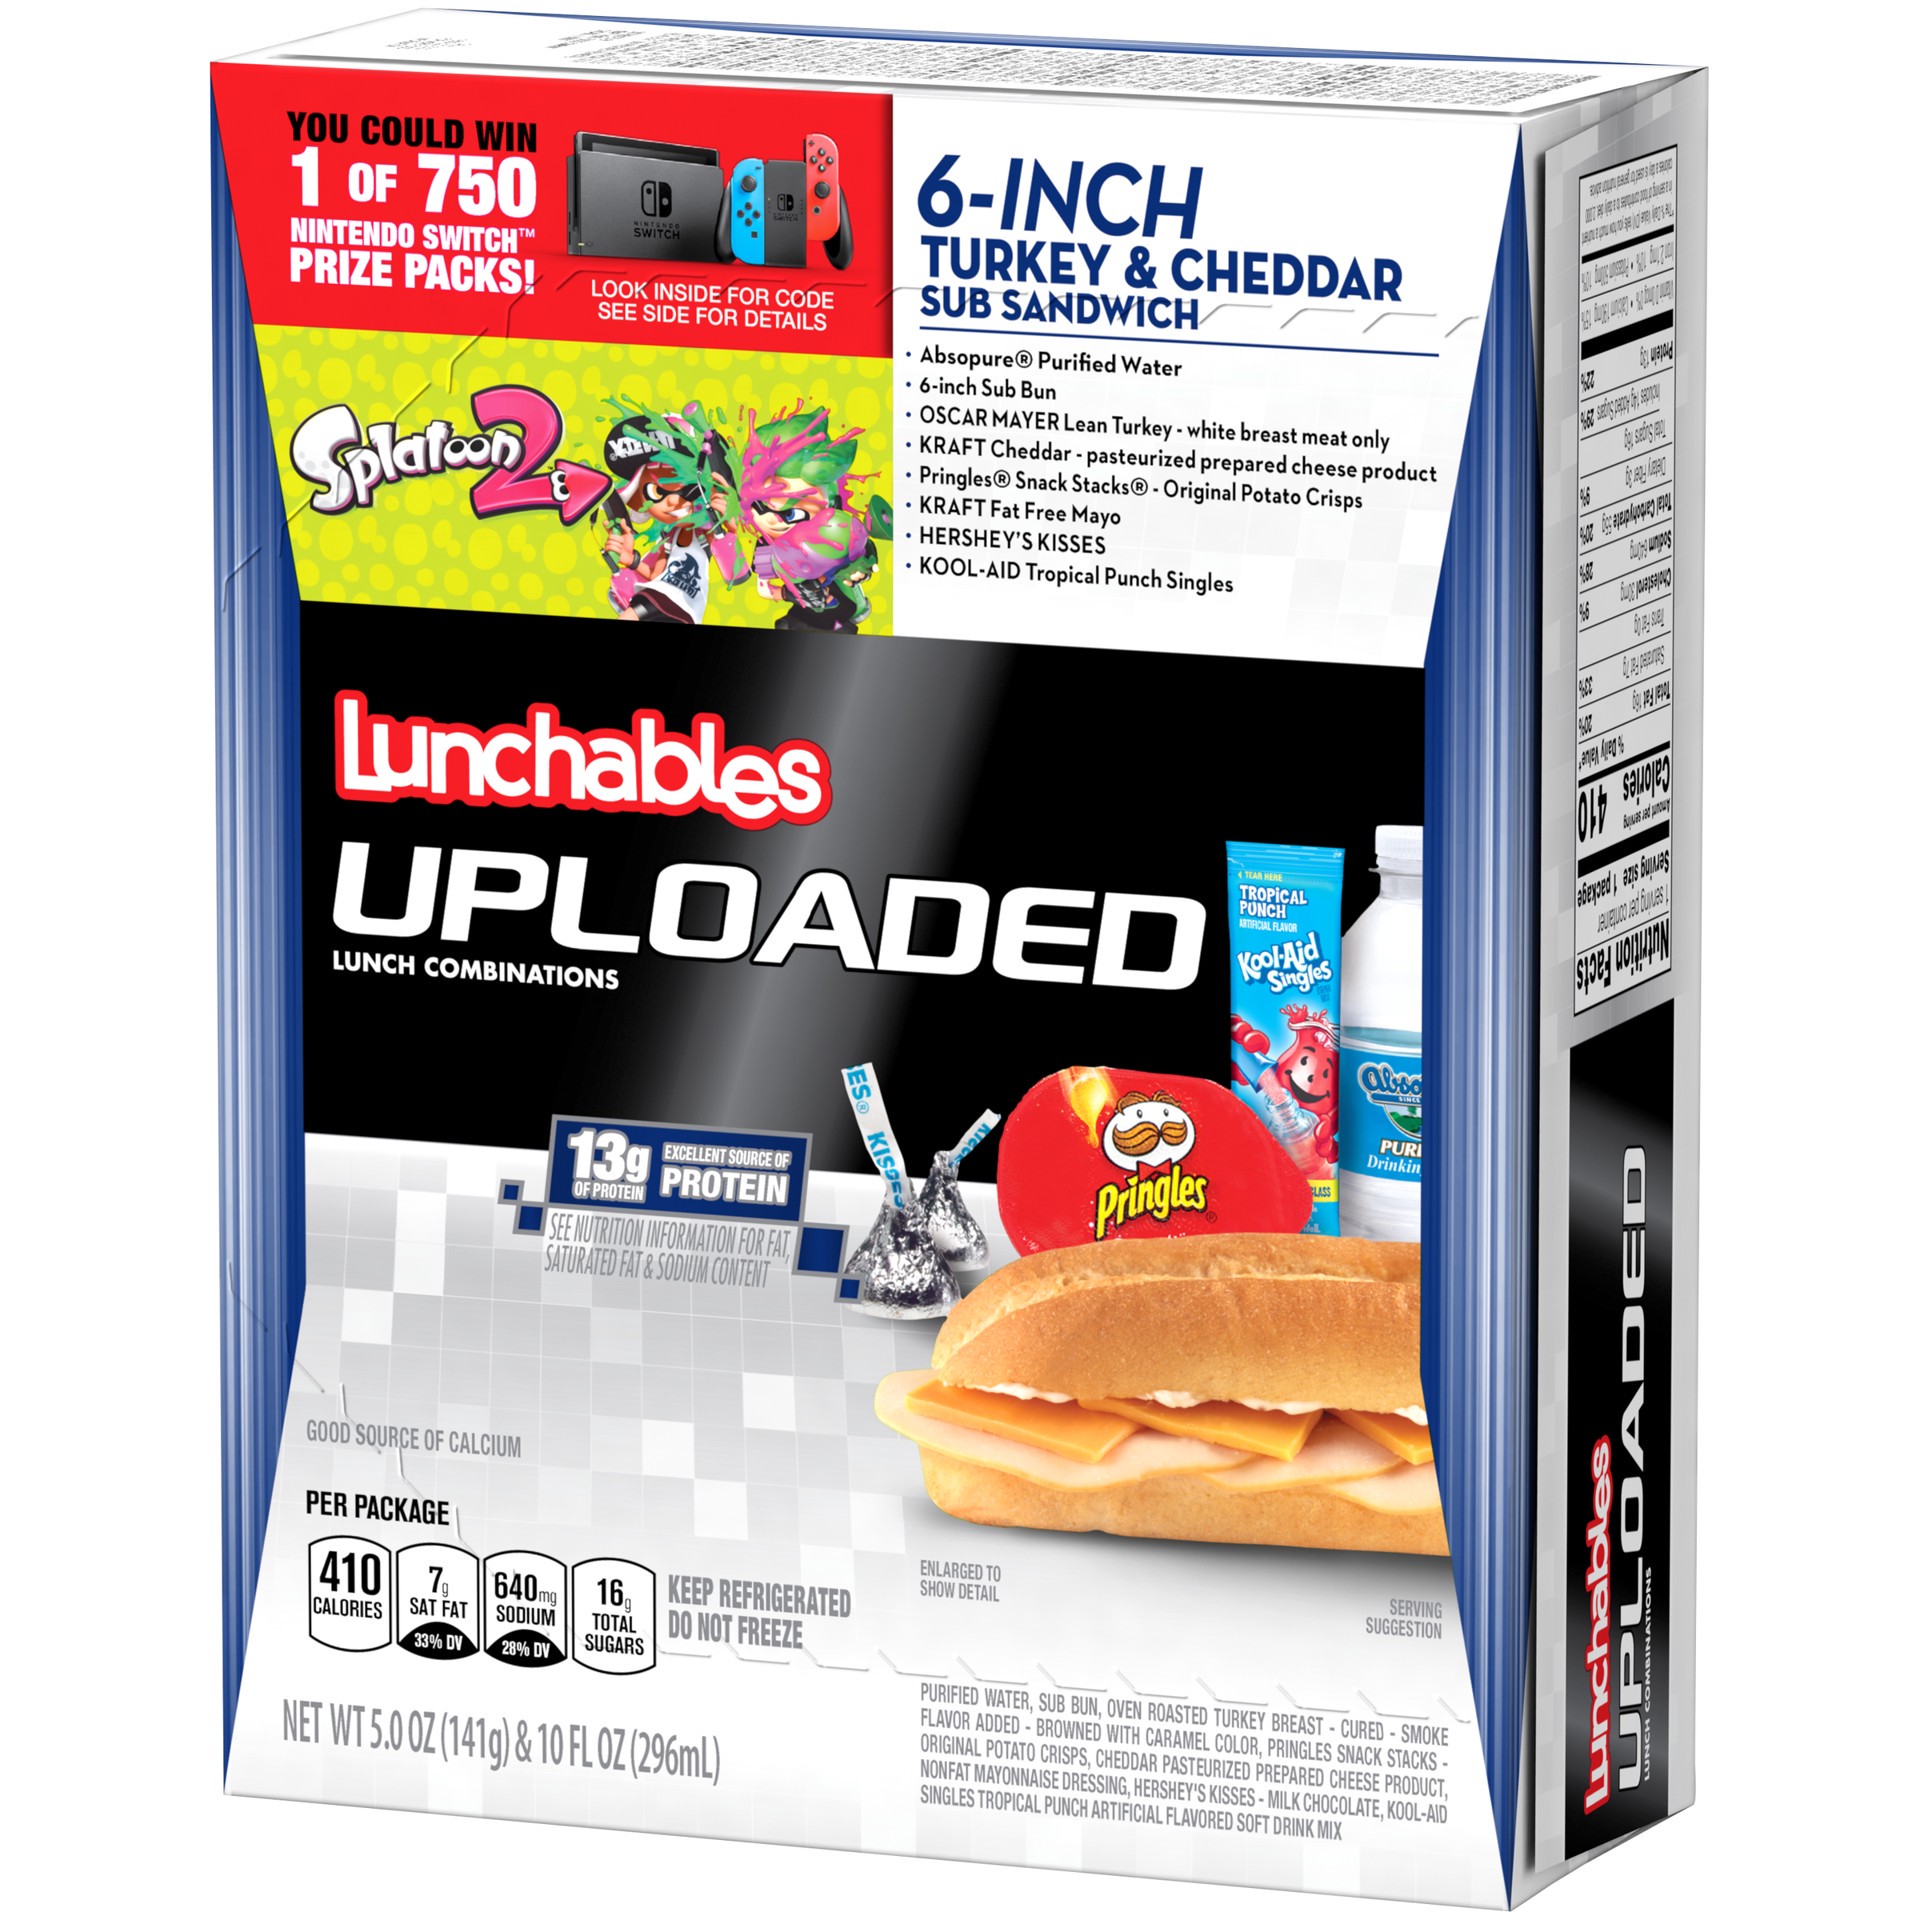 slide 4 of 8, Lunchables Uploaded Turkey and Cheddar Sub Sandwich Meal Kit with Pringles, Hershey's Kisses, Absopure Water and Kool-Aid Tropical Punch Single, 15 oz